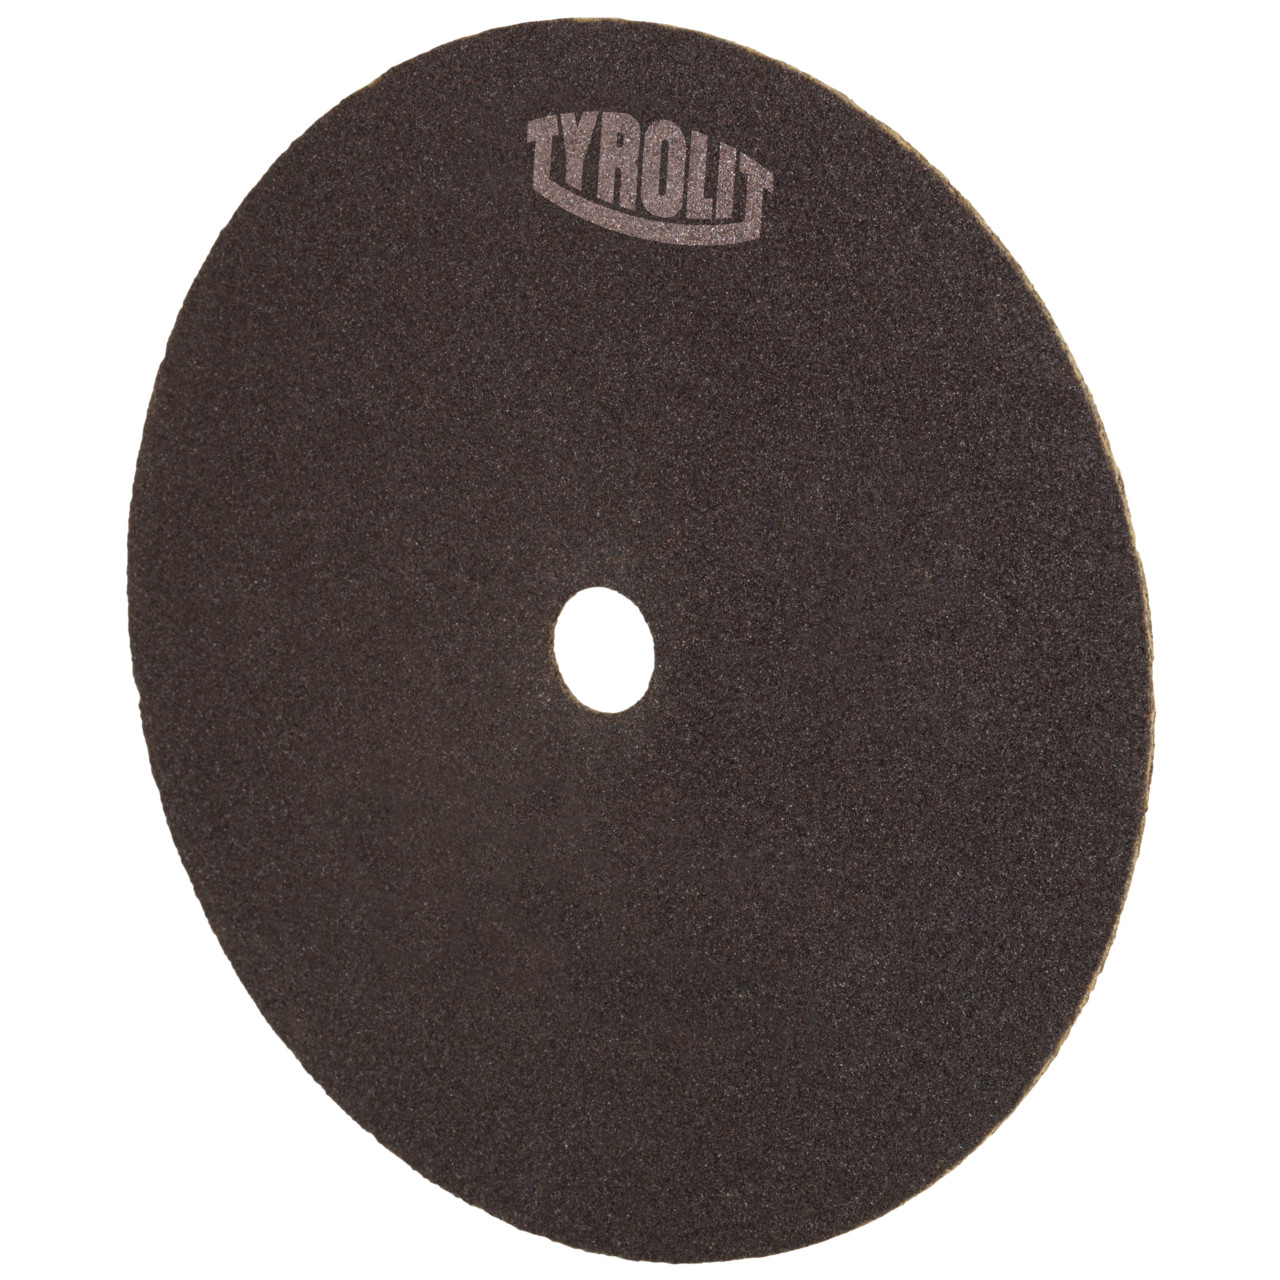 Tyrolit Cutting disc for cutting and saw sharpening DxDxH 150x1x30 For steel and HSS, shape: 41N - straight version (non-woven cutting disc), Art. 75306